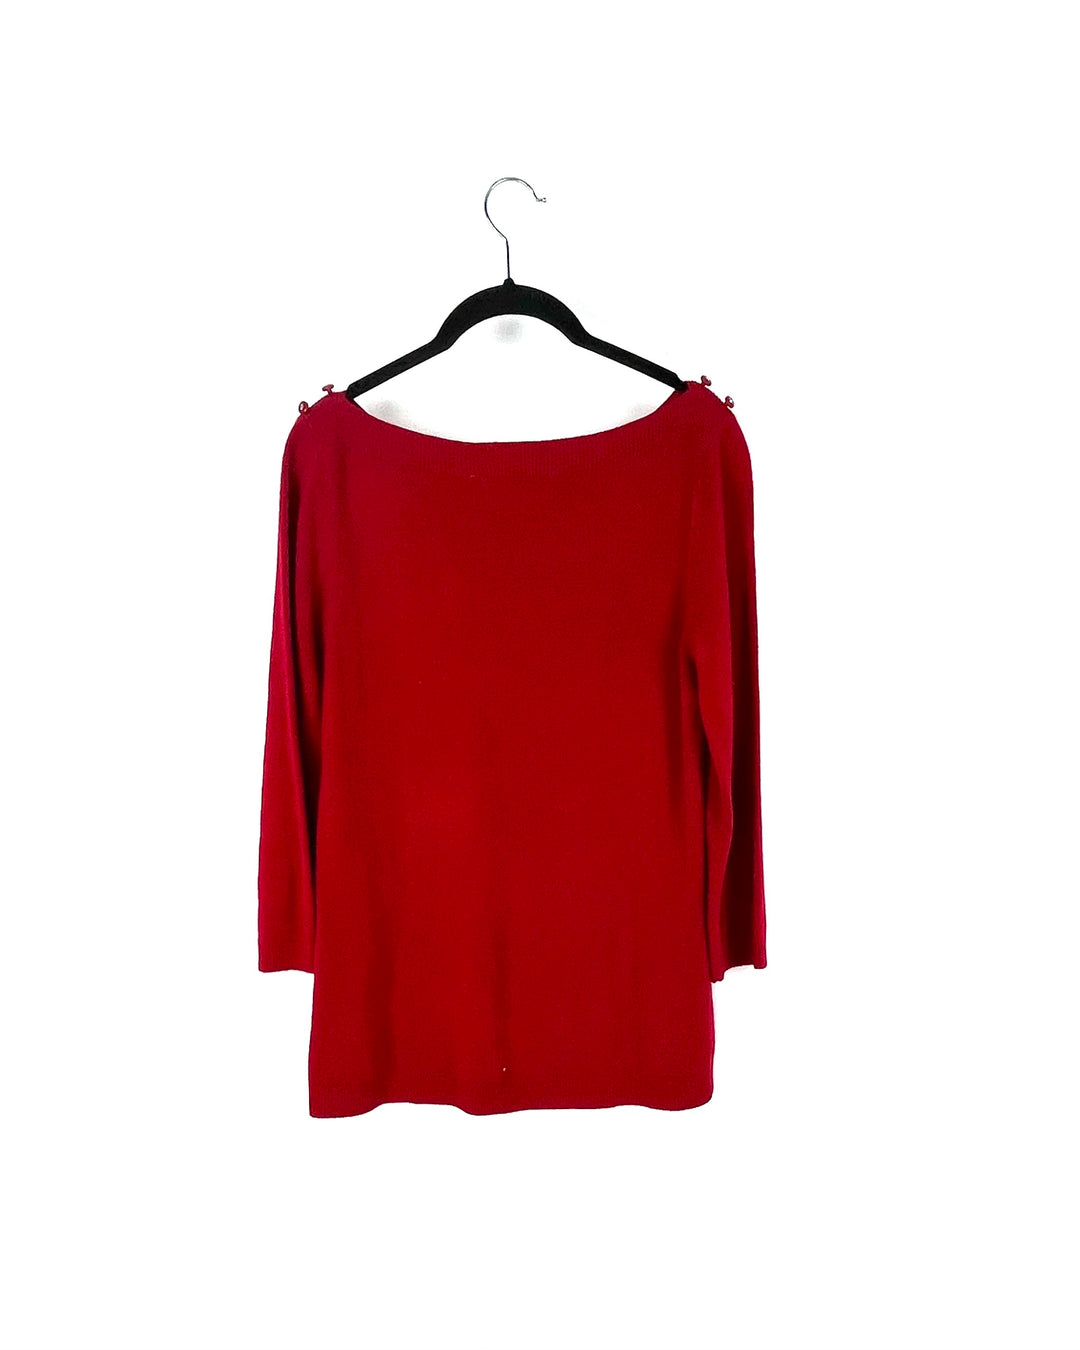 Red Quarter Sleeve Top - Small